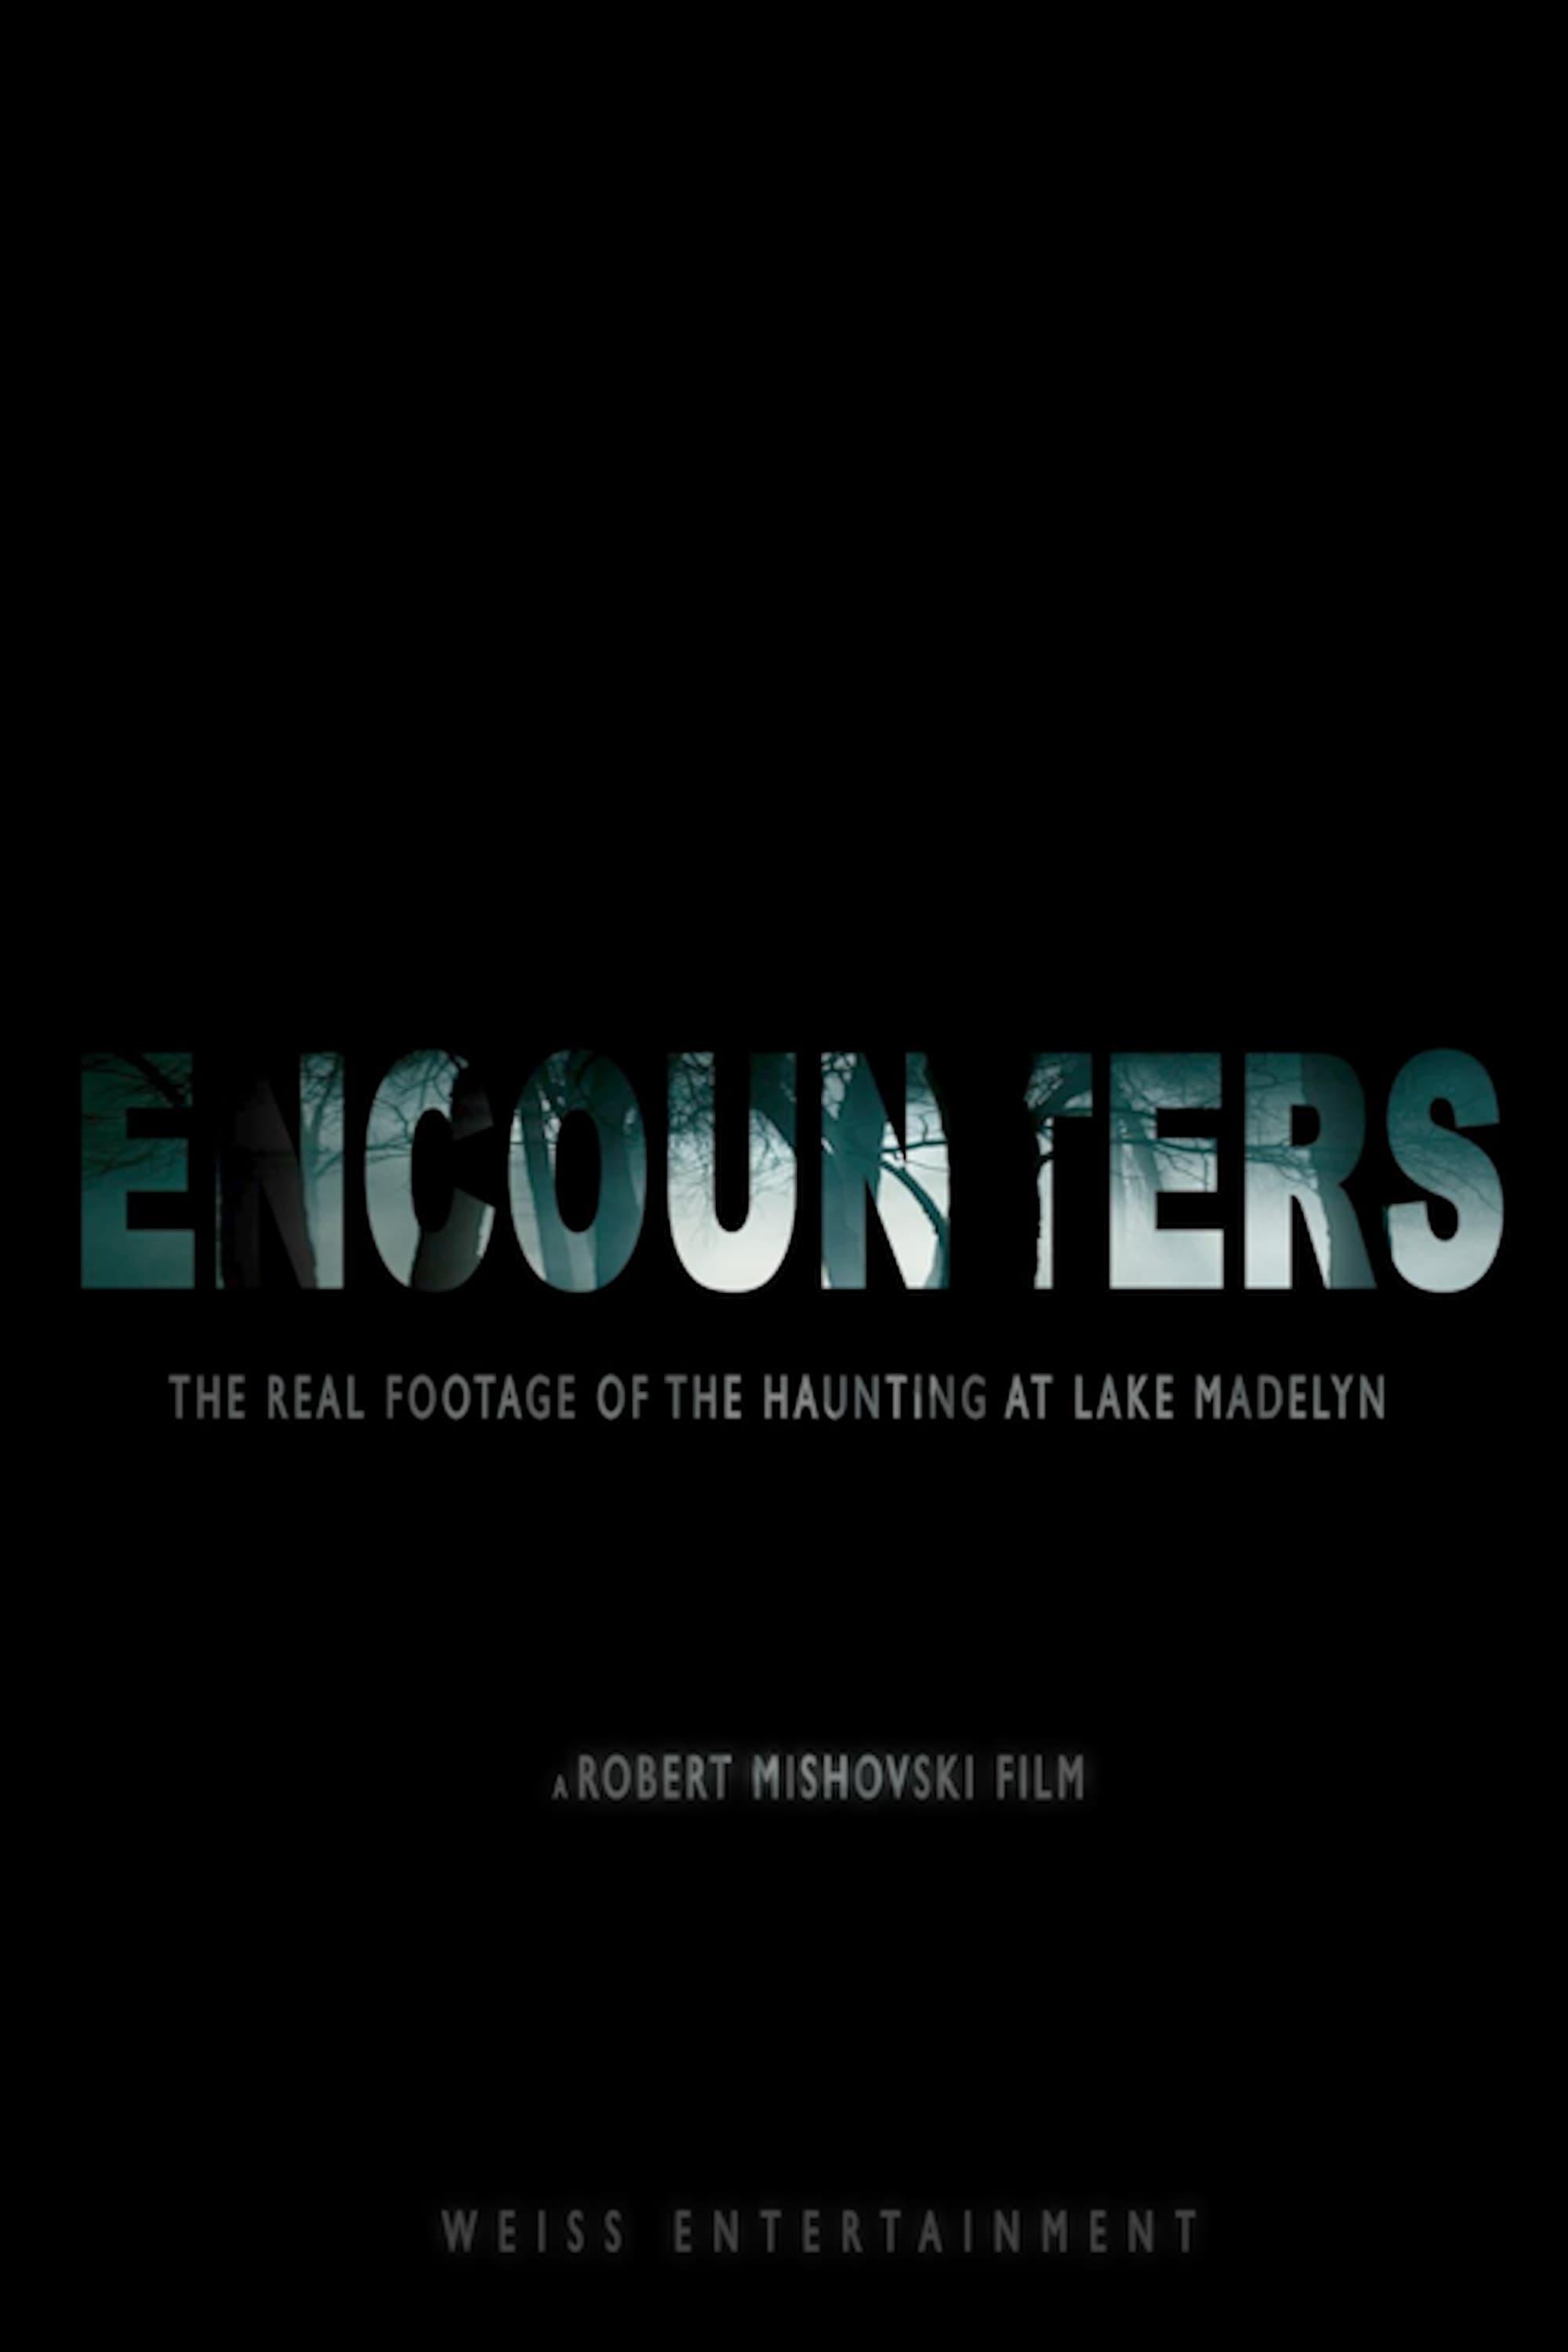 Encounters poster